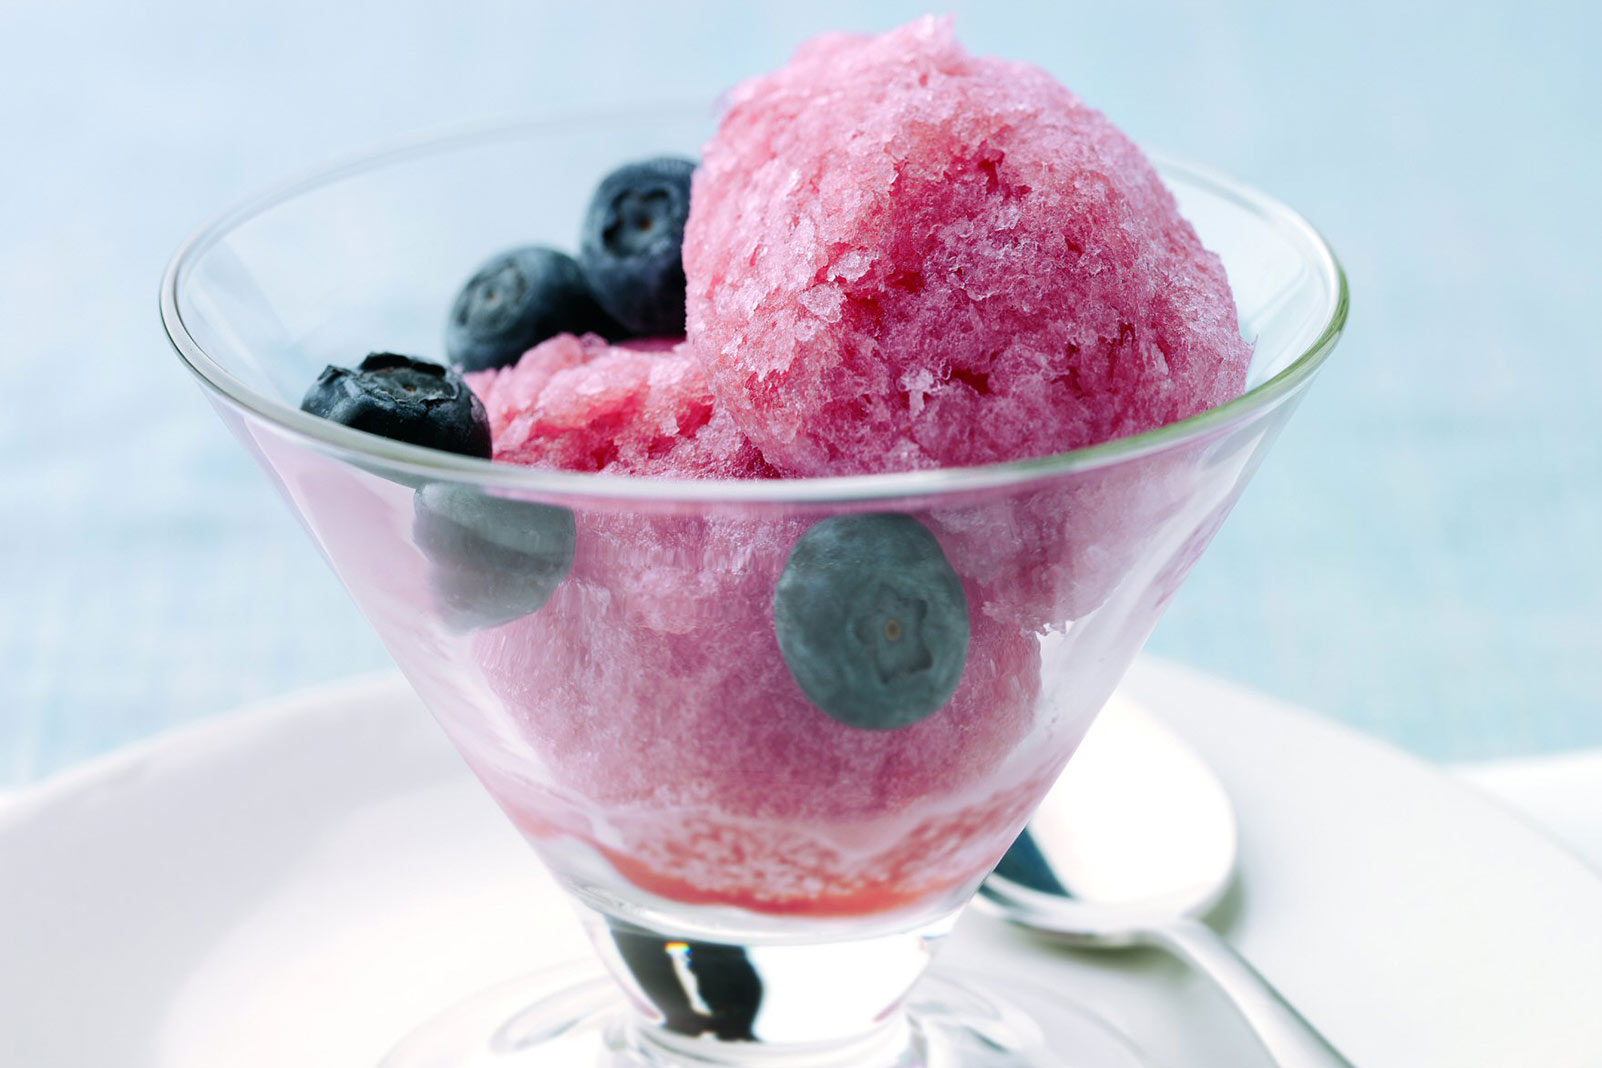 Blueberry and Citrus Sorbet